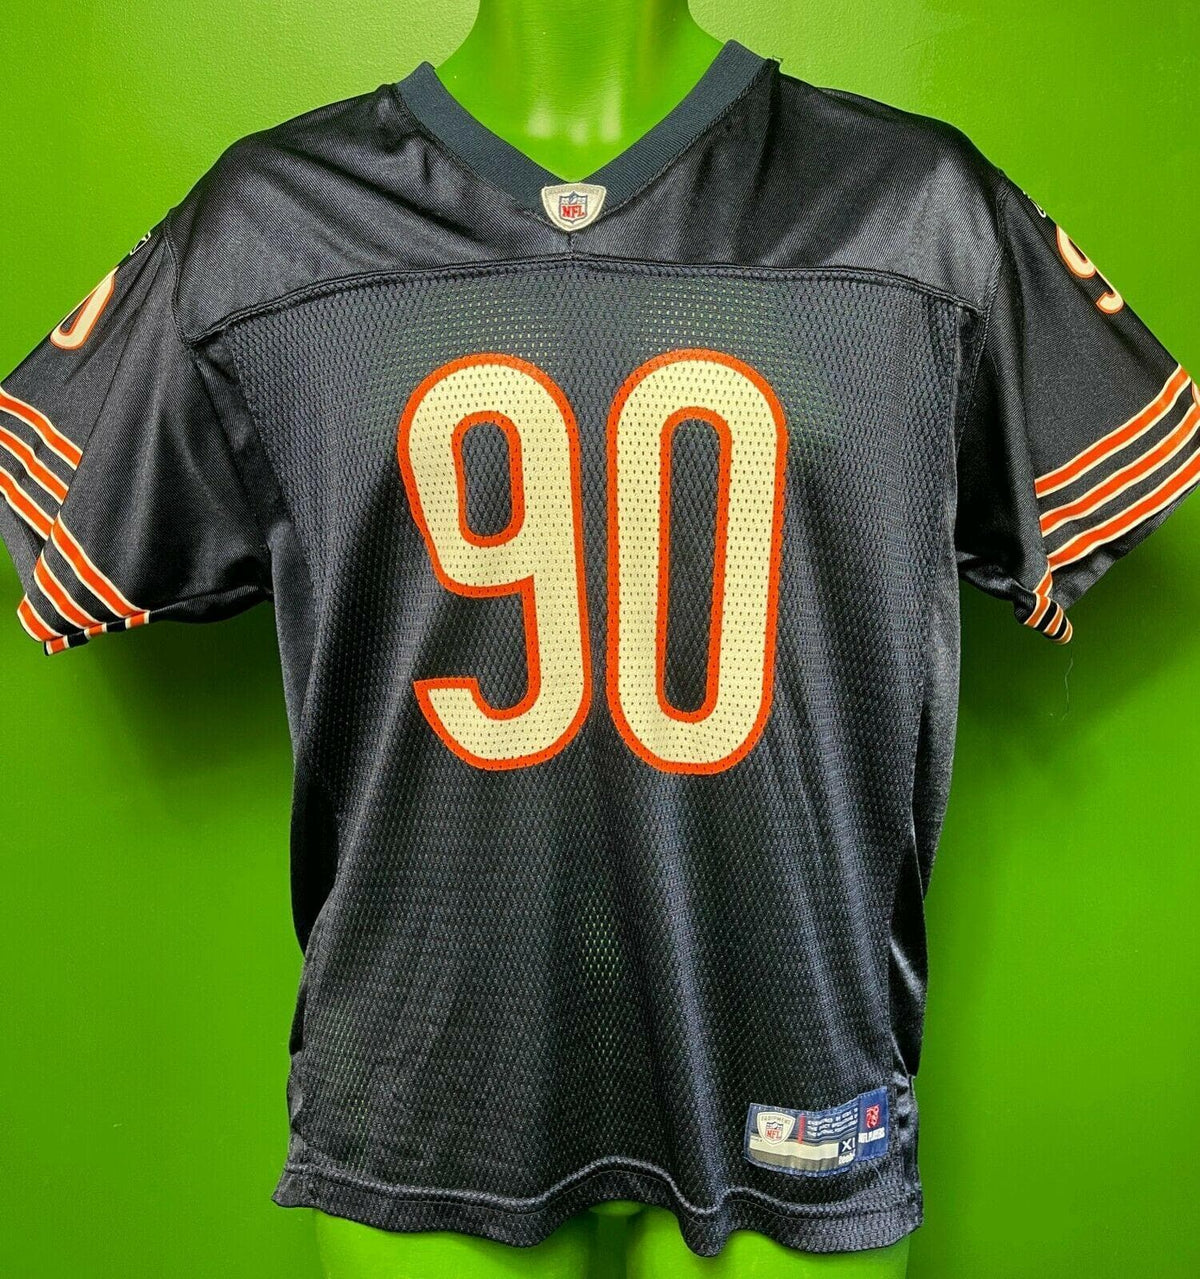 NFL Chicago Bears Julius Peppers #90 Reebok Jersey Youth XL 18-20